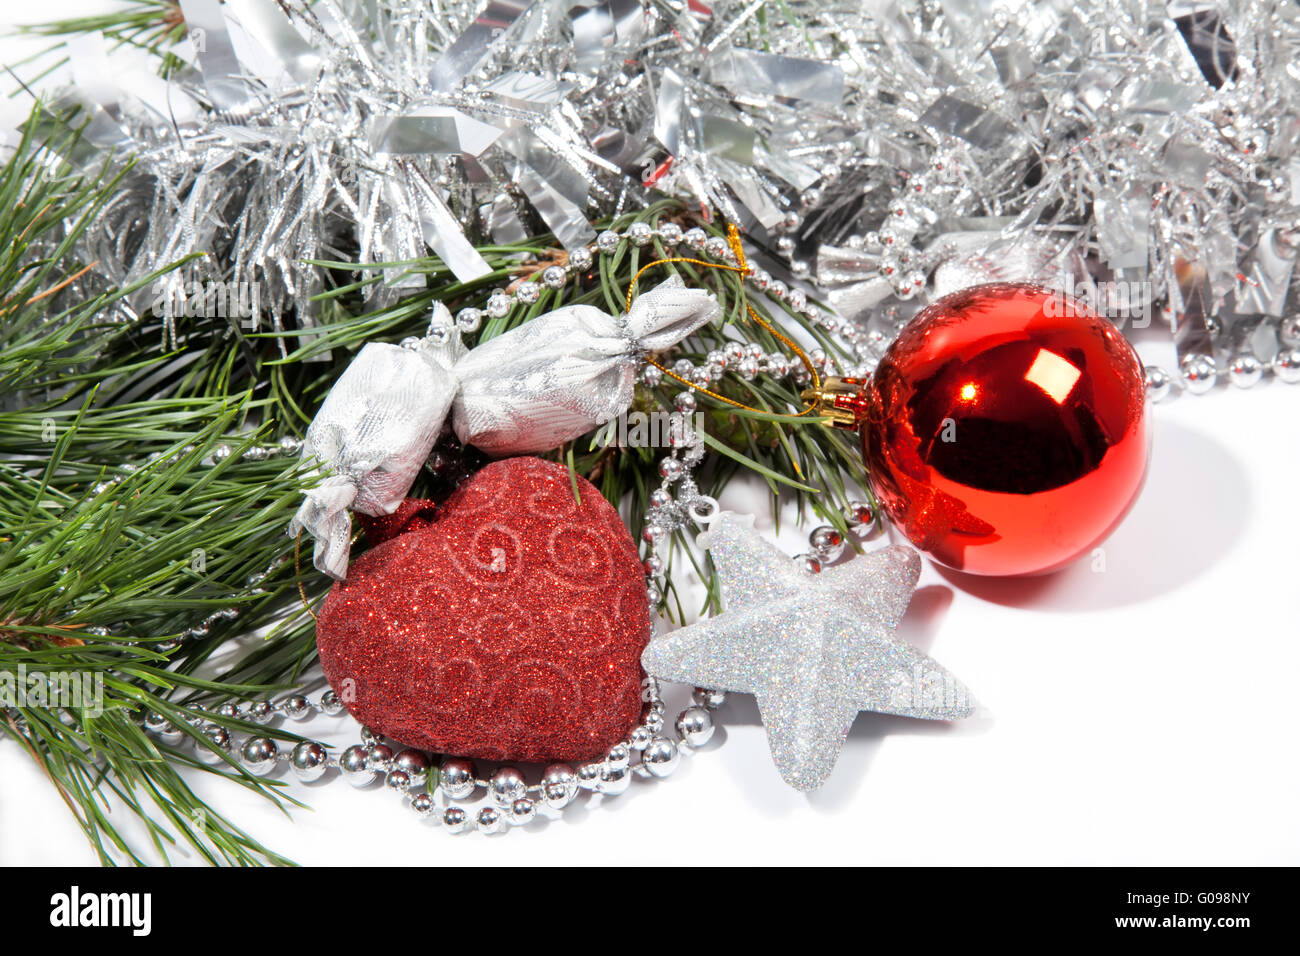 Red Christmas balls and silver star on pine branch Stock Photo